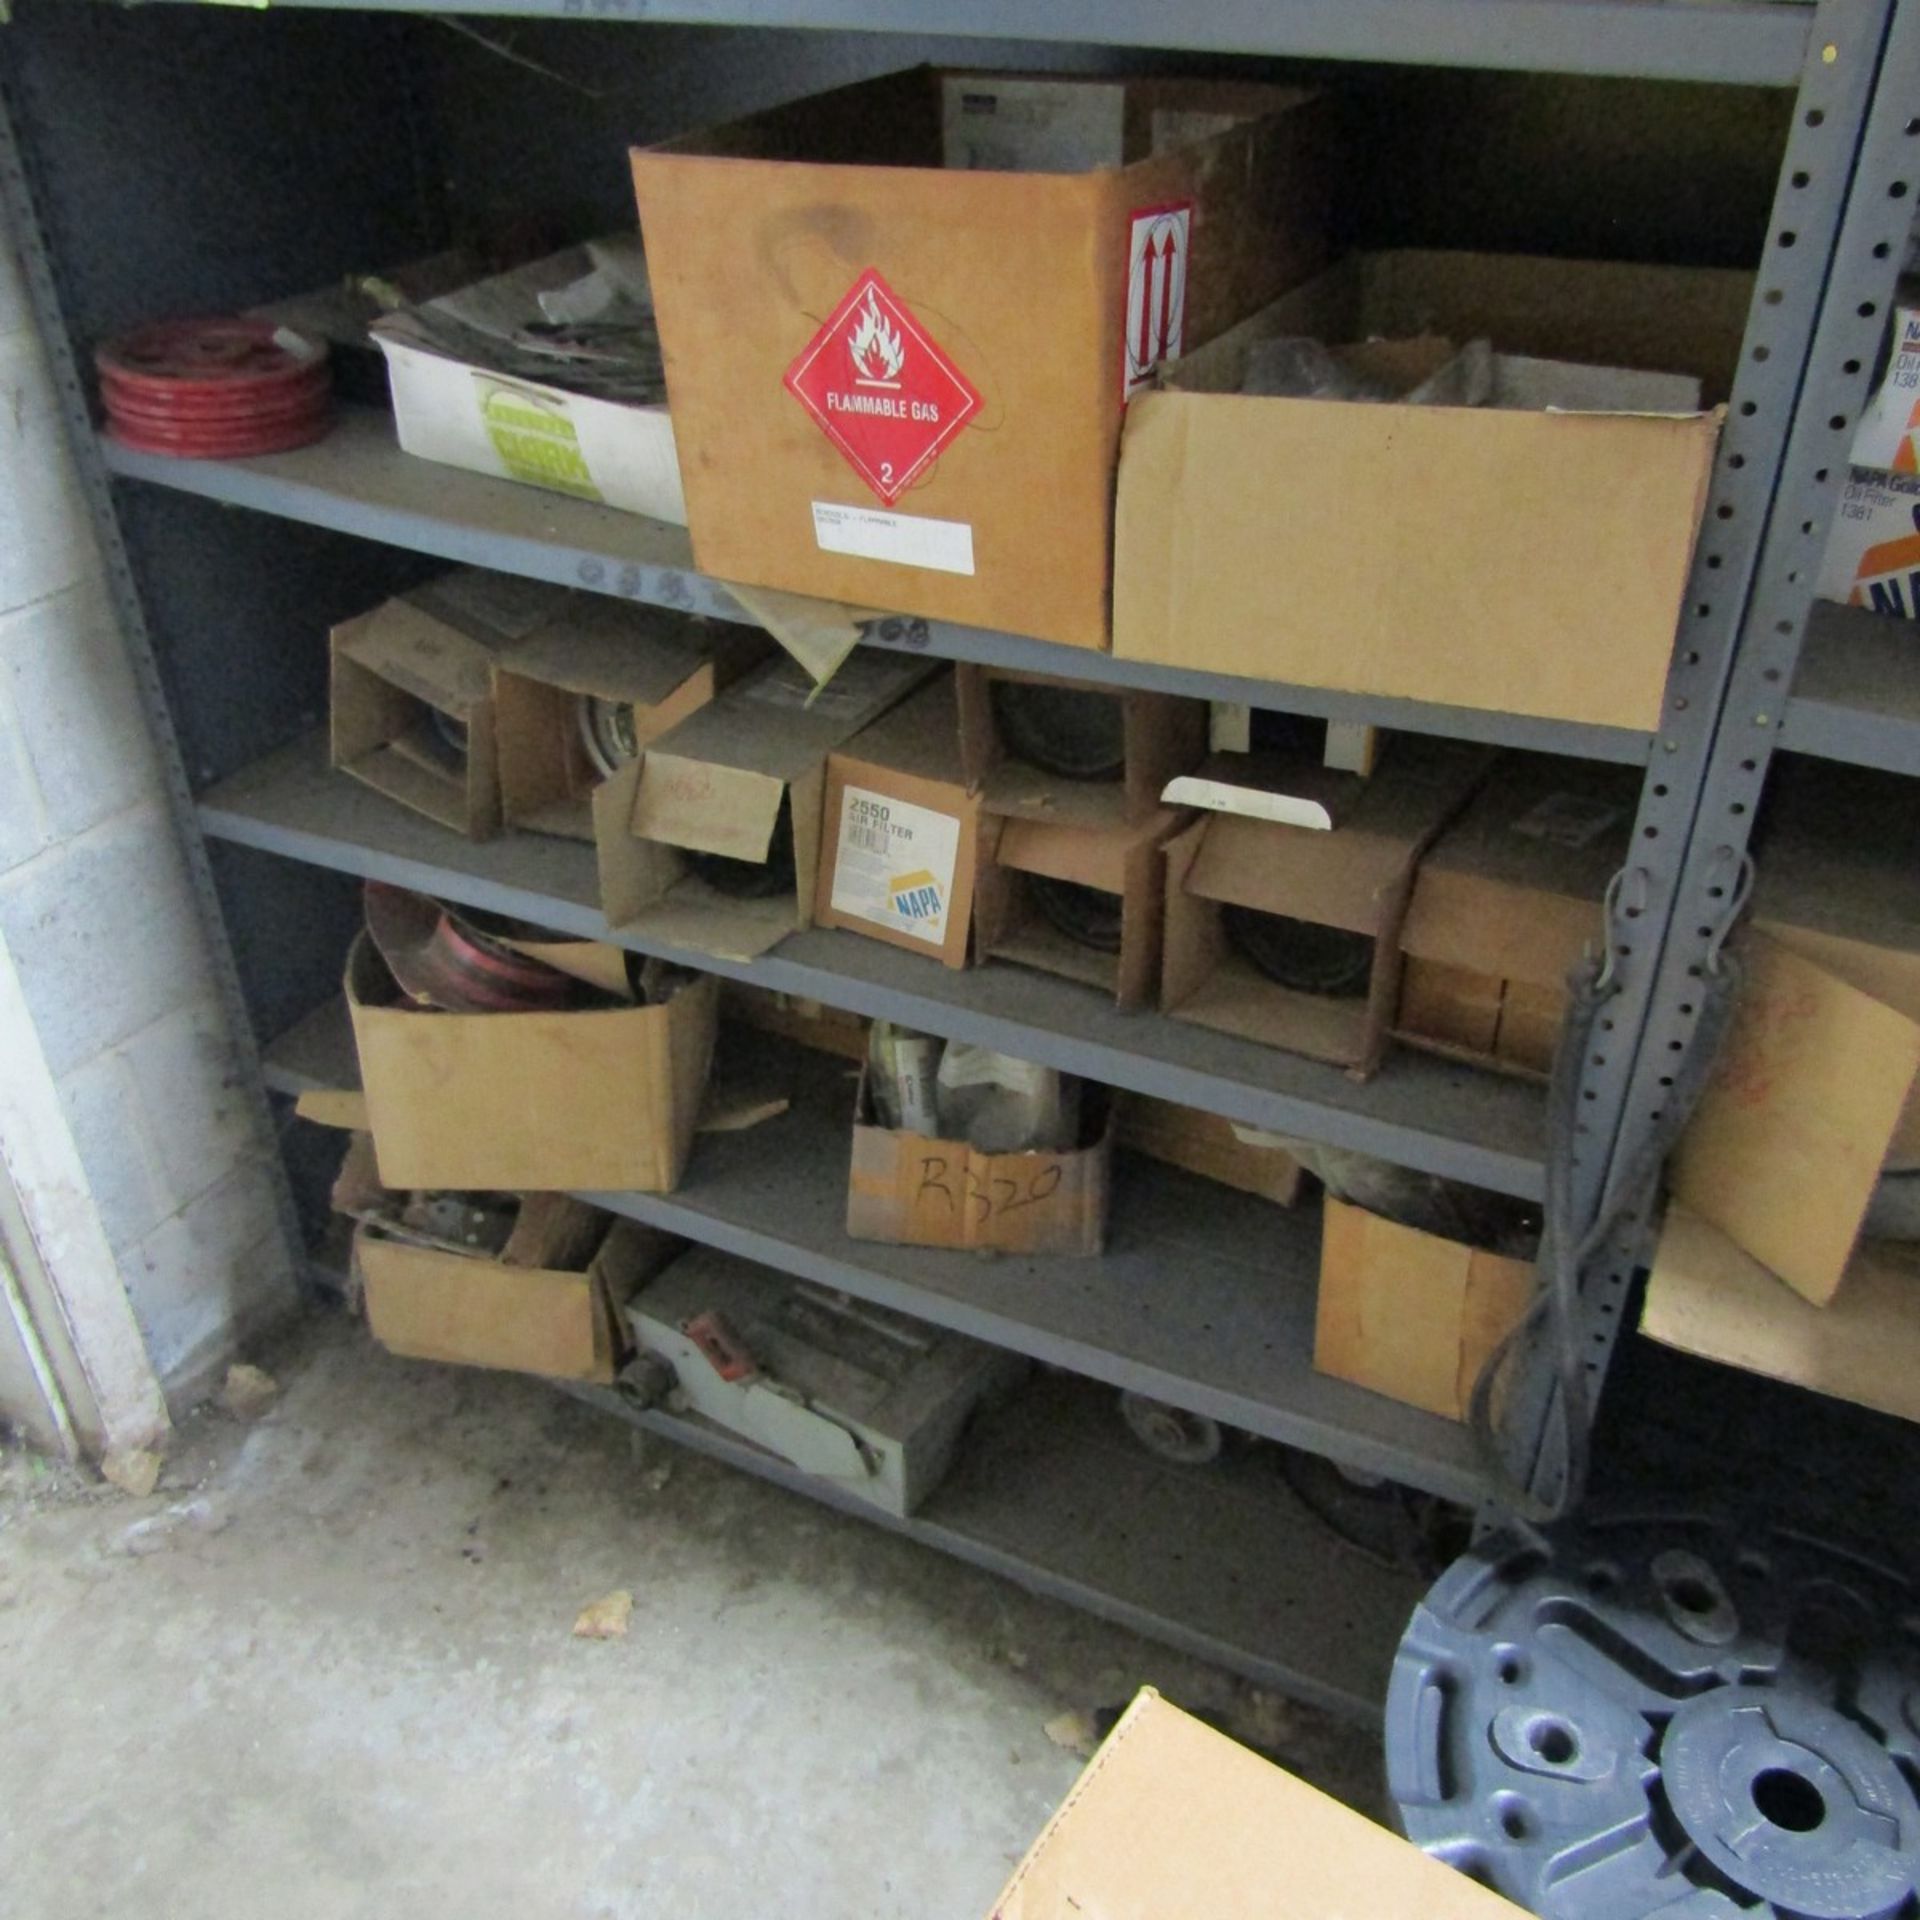 Shelving Units with Contents to Include 74" x 48", Pumps, Connectors, Plugs, Oil Filters, Fittings - Image 7 of 15